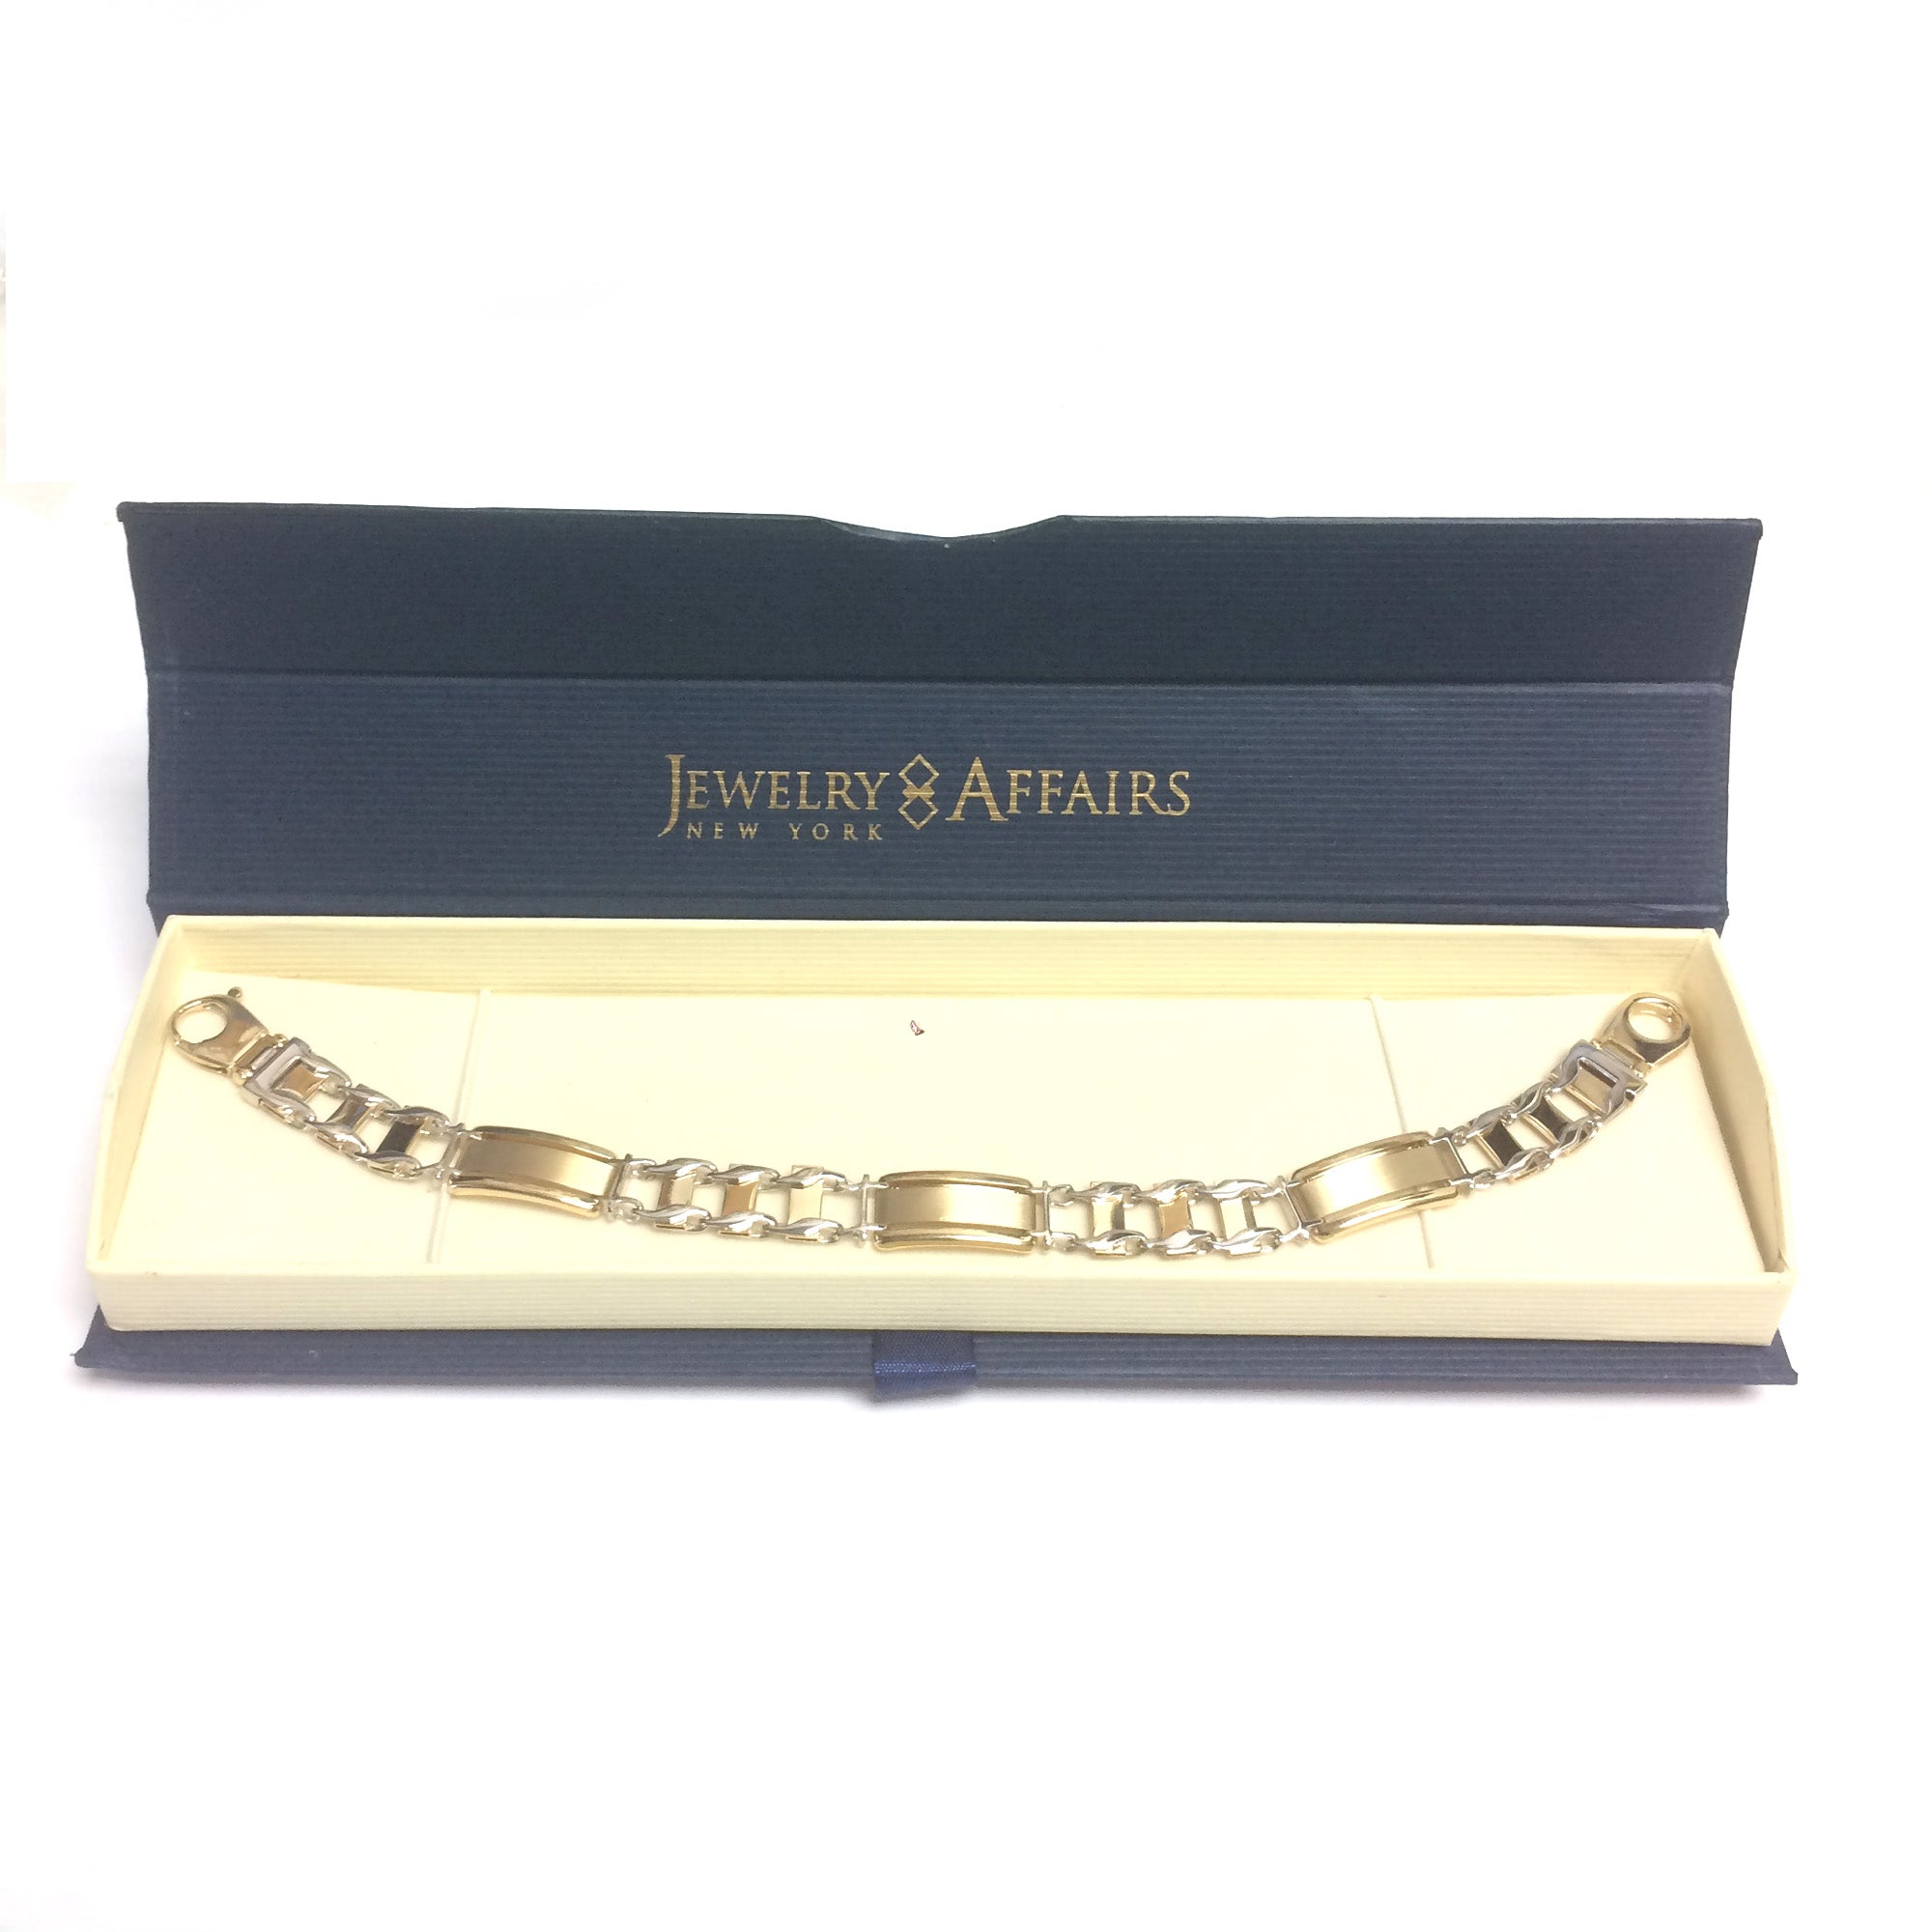 14k Yellow And White Gold Rolex Link Mens Bracelet, 8.5" fine designer jewelry for men and women